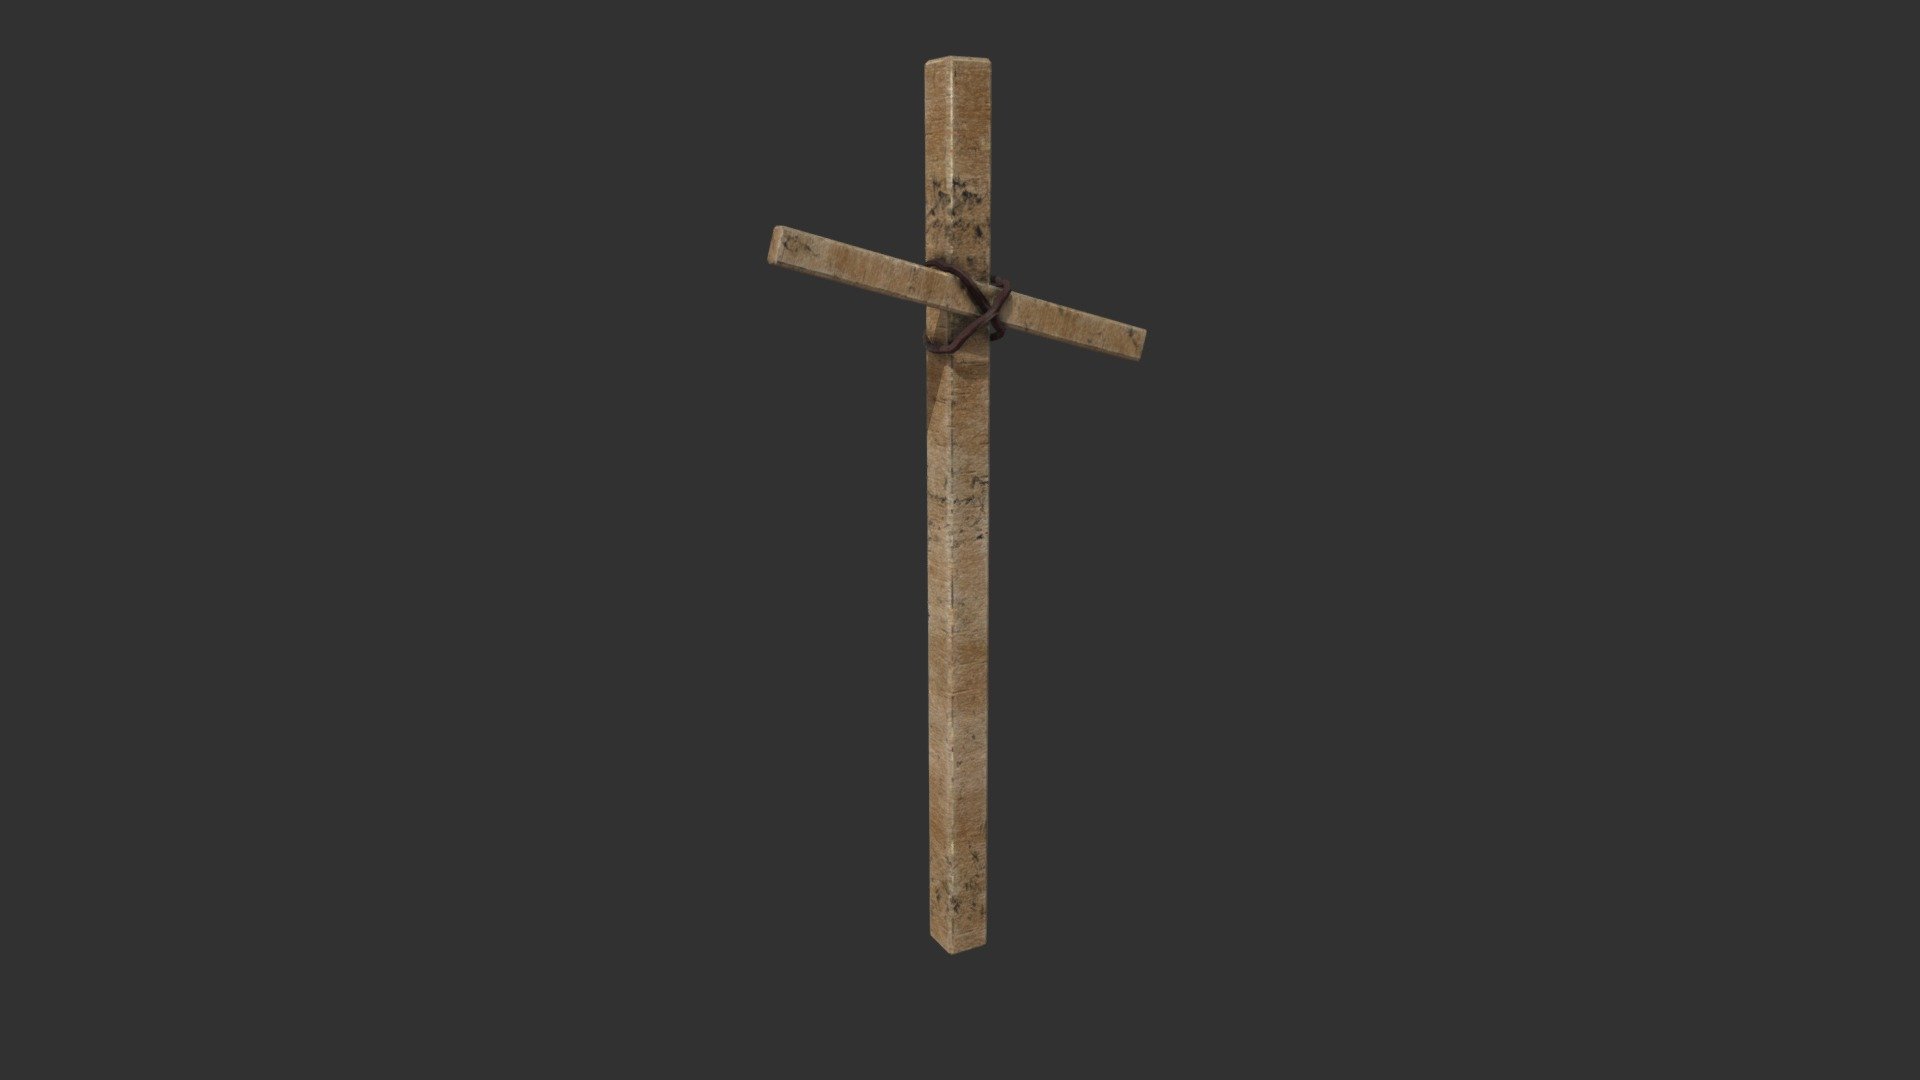 Withered and damaged crucifix

Made to look aged and corrupted somewhat

If you use in a project, please email me and let me know, I’d loved to see what you’ve done! - Withered Wooden Crucifix - Download Free 3D model by mccradj 3d model